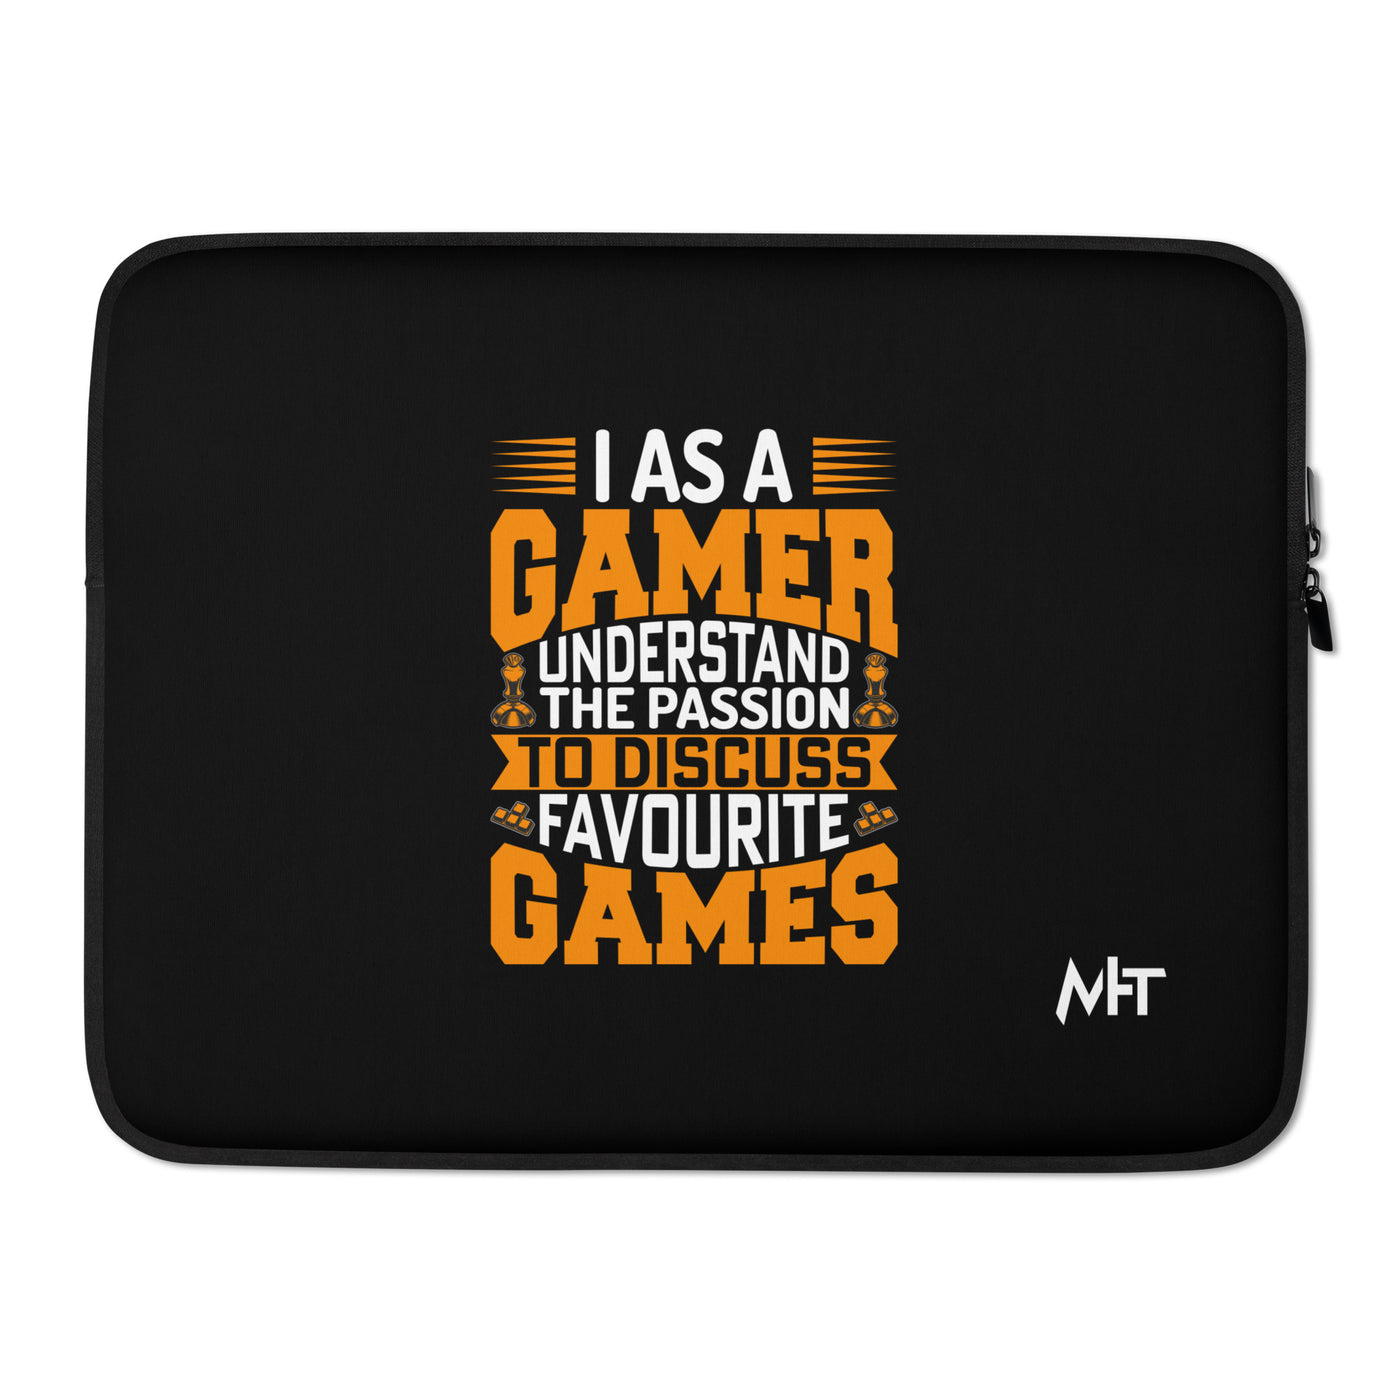 I, as a Gamer, Understand the Passion to Discuss Favorite Games - Laptop Sleeve